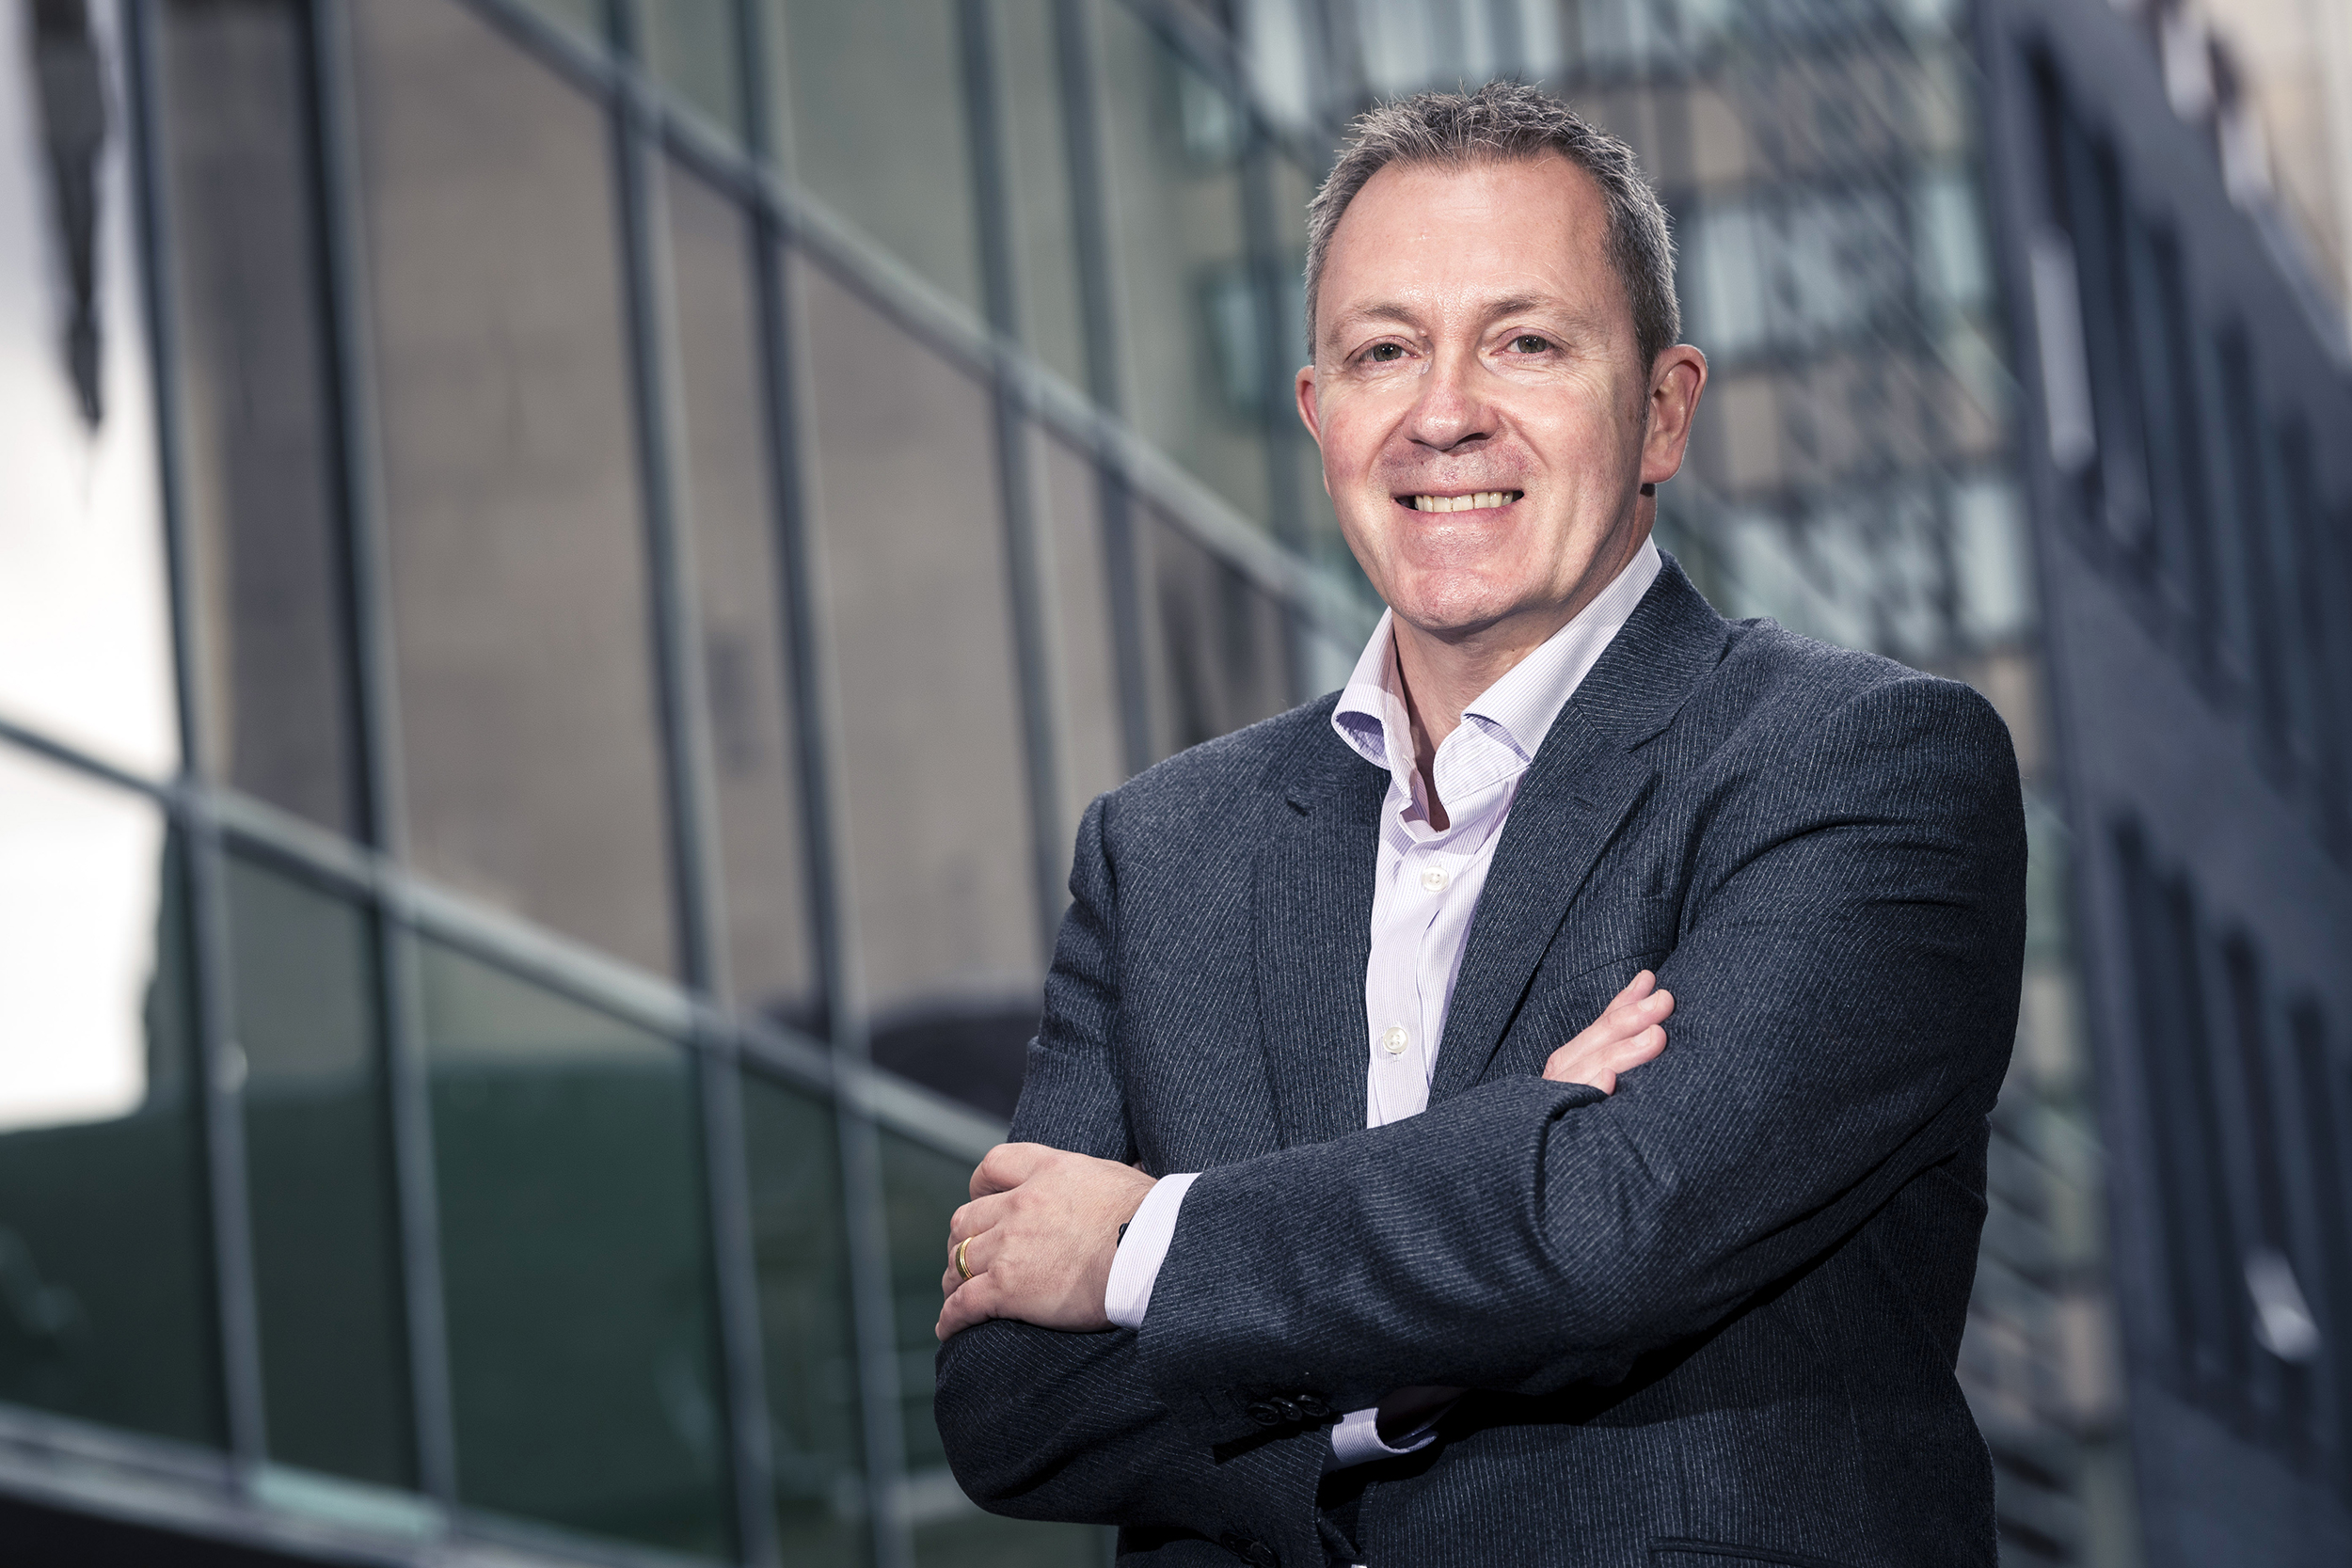 Software testing expert 2i secures £20m contract to lead social security transformation